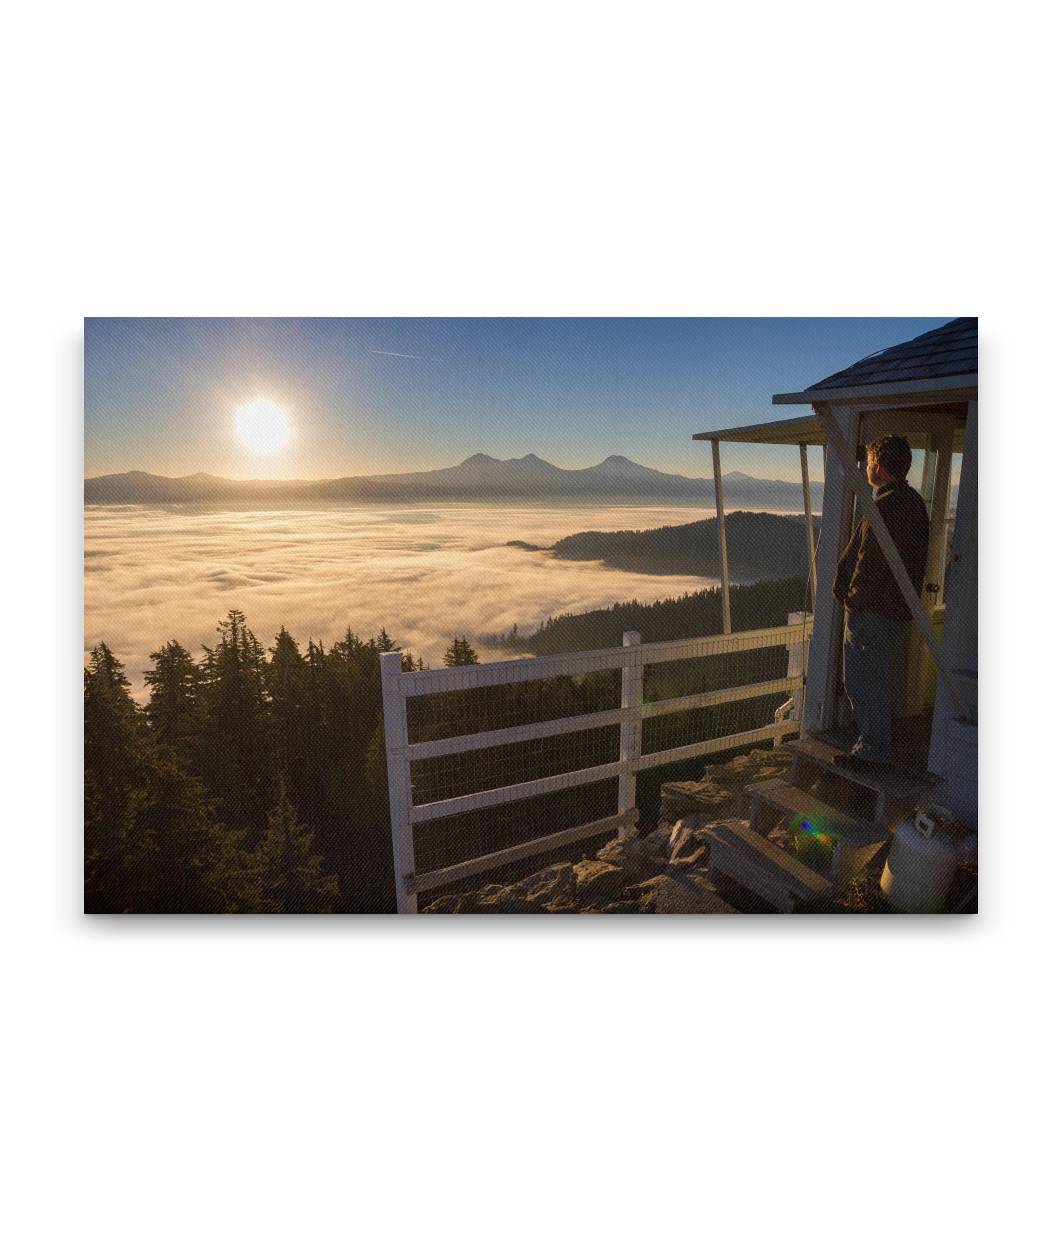 Sunrise and Three Sisters Wilderness From Carpenter Mountain Fire Lookout, Oregon, USA